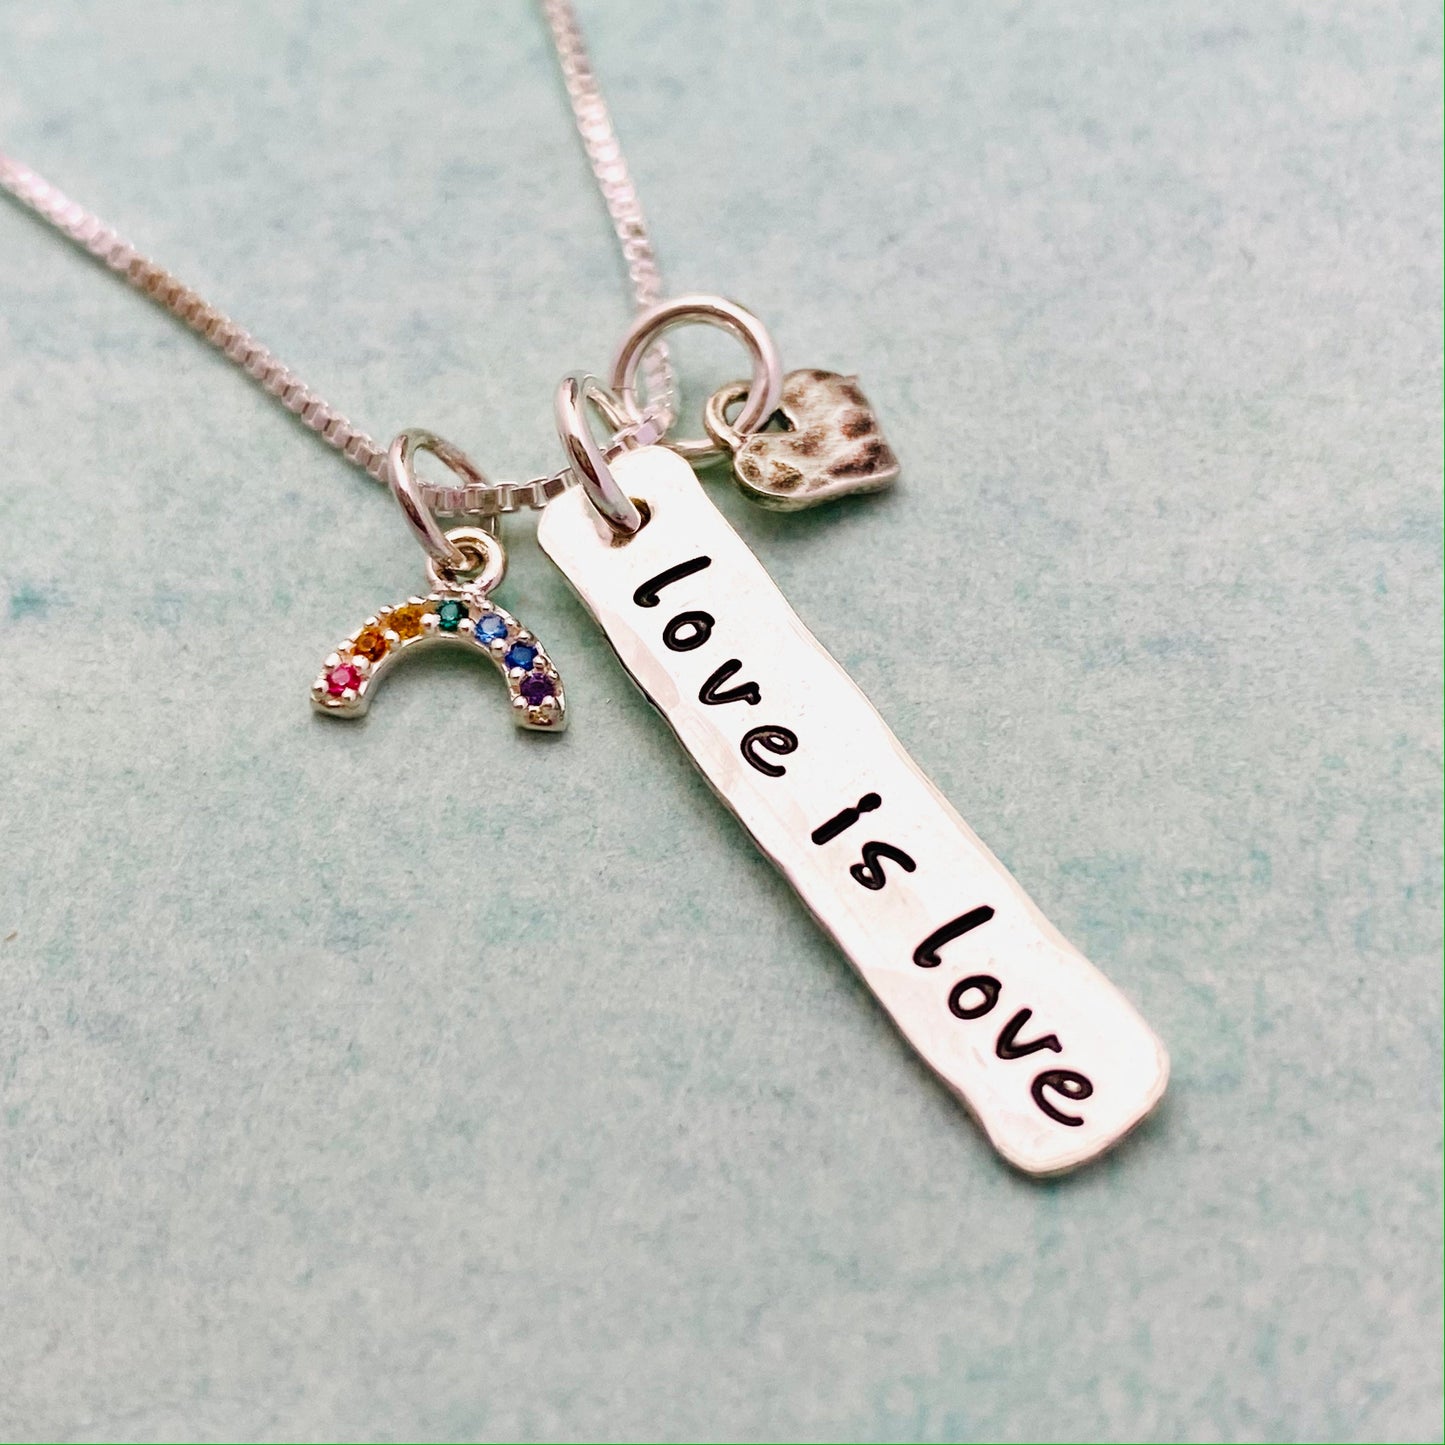 Love is Love Necklace, Cute Rainbow Pride Necklace, Valentine's Day Gift, LGBTQ+ Jewelry, Tiny Hand Stamped Charm Necklace, Rainbow Necklace